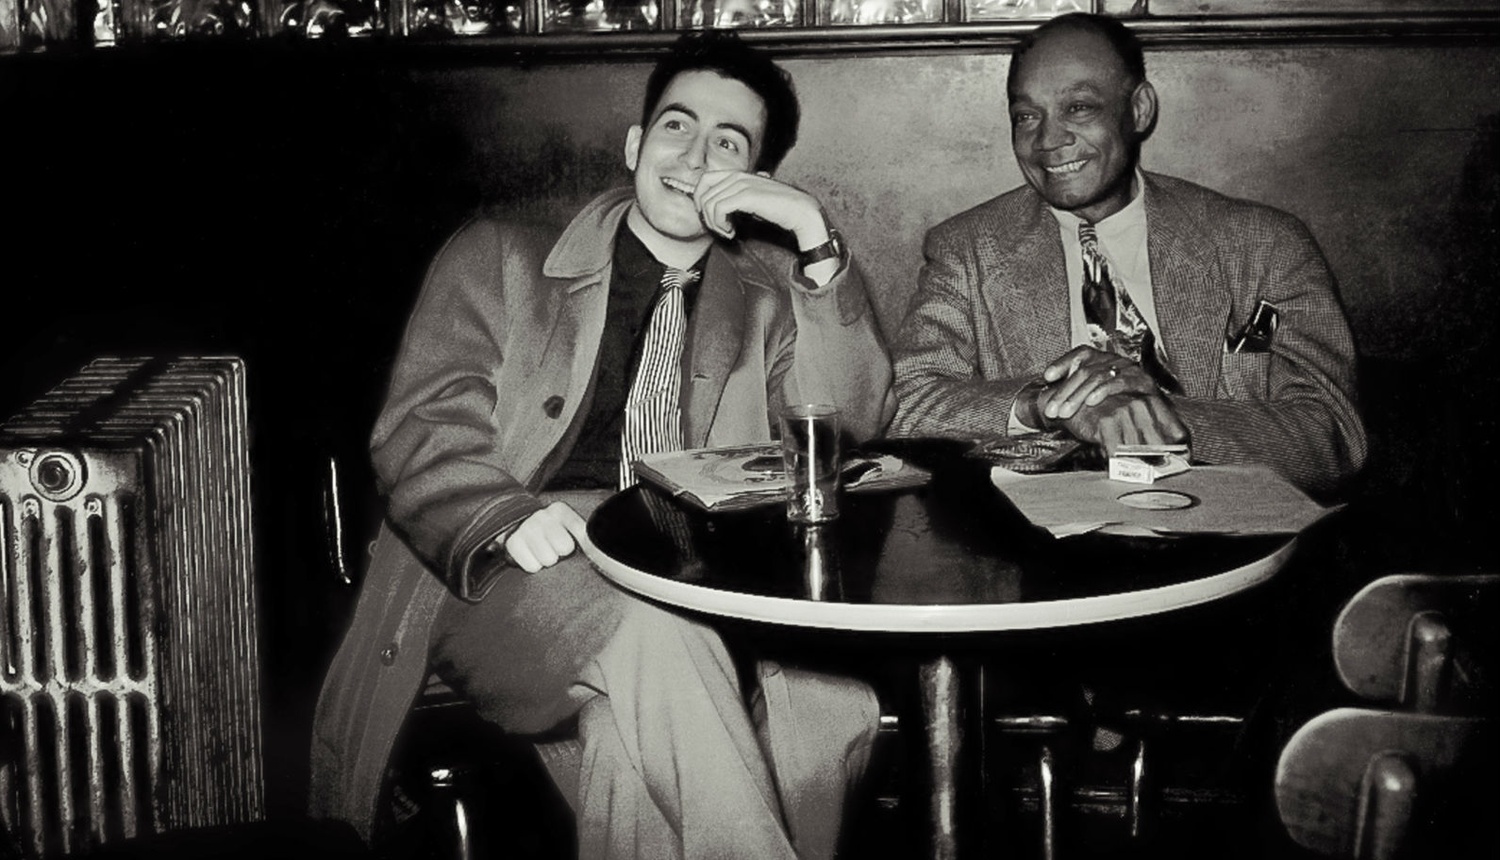 Nat Hentoff and clarinetist Edmond Hall in 1948 at the Savoy Club, Boston. Photo by Bob Parent.